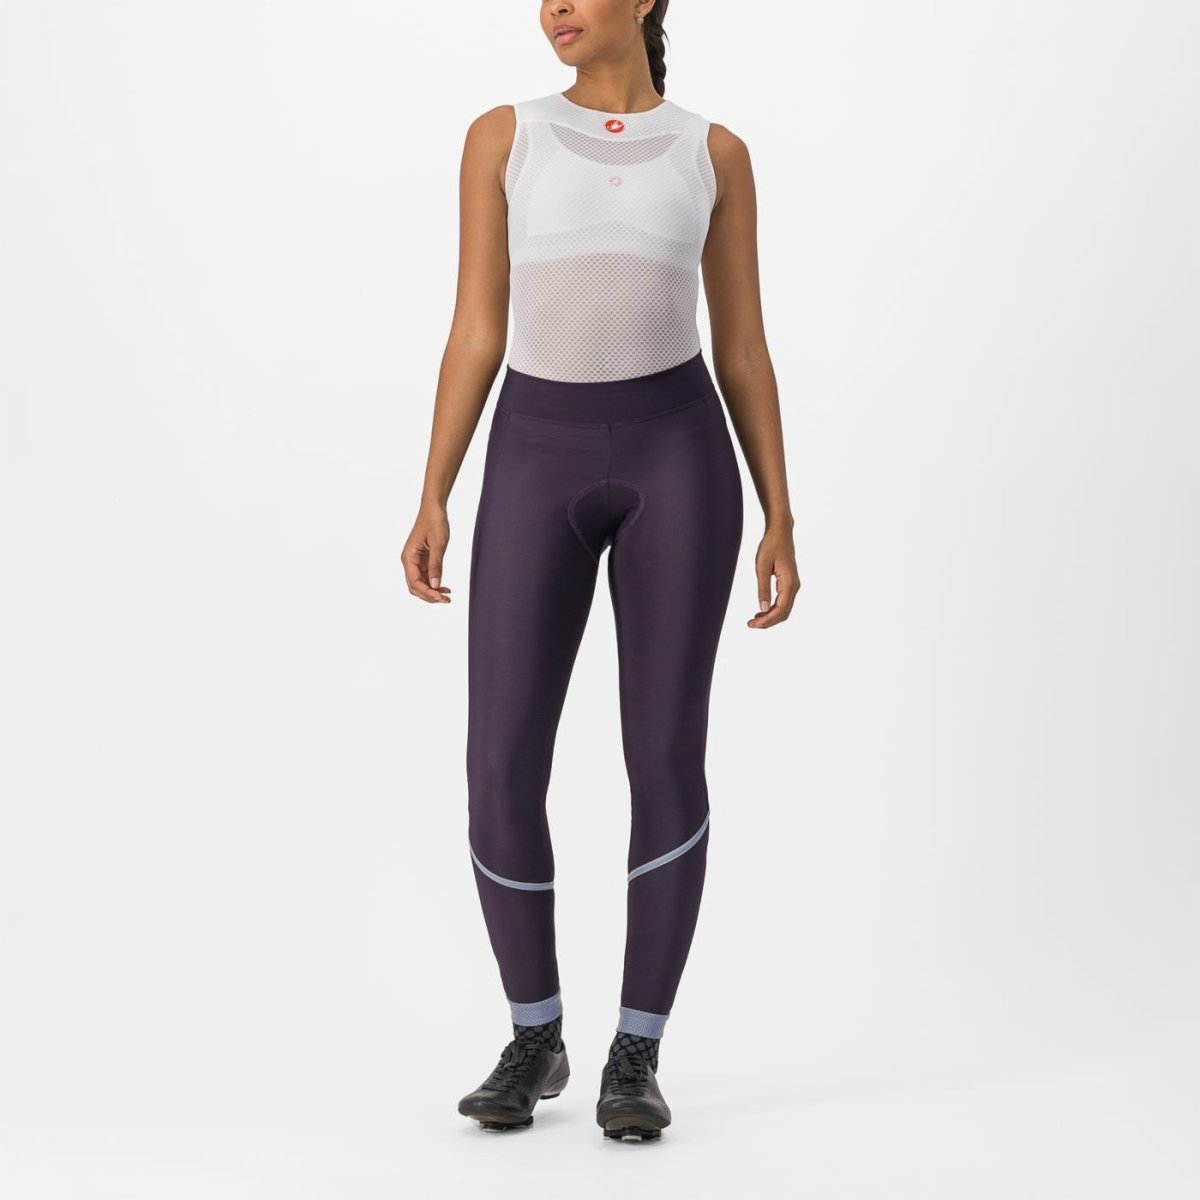 Women's Thermal Cycling Tights, Cool & Cold Weather